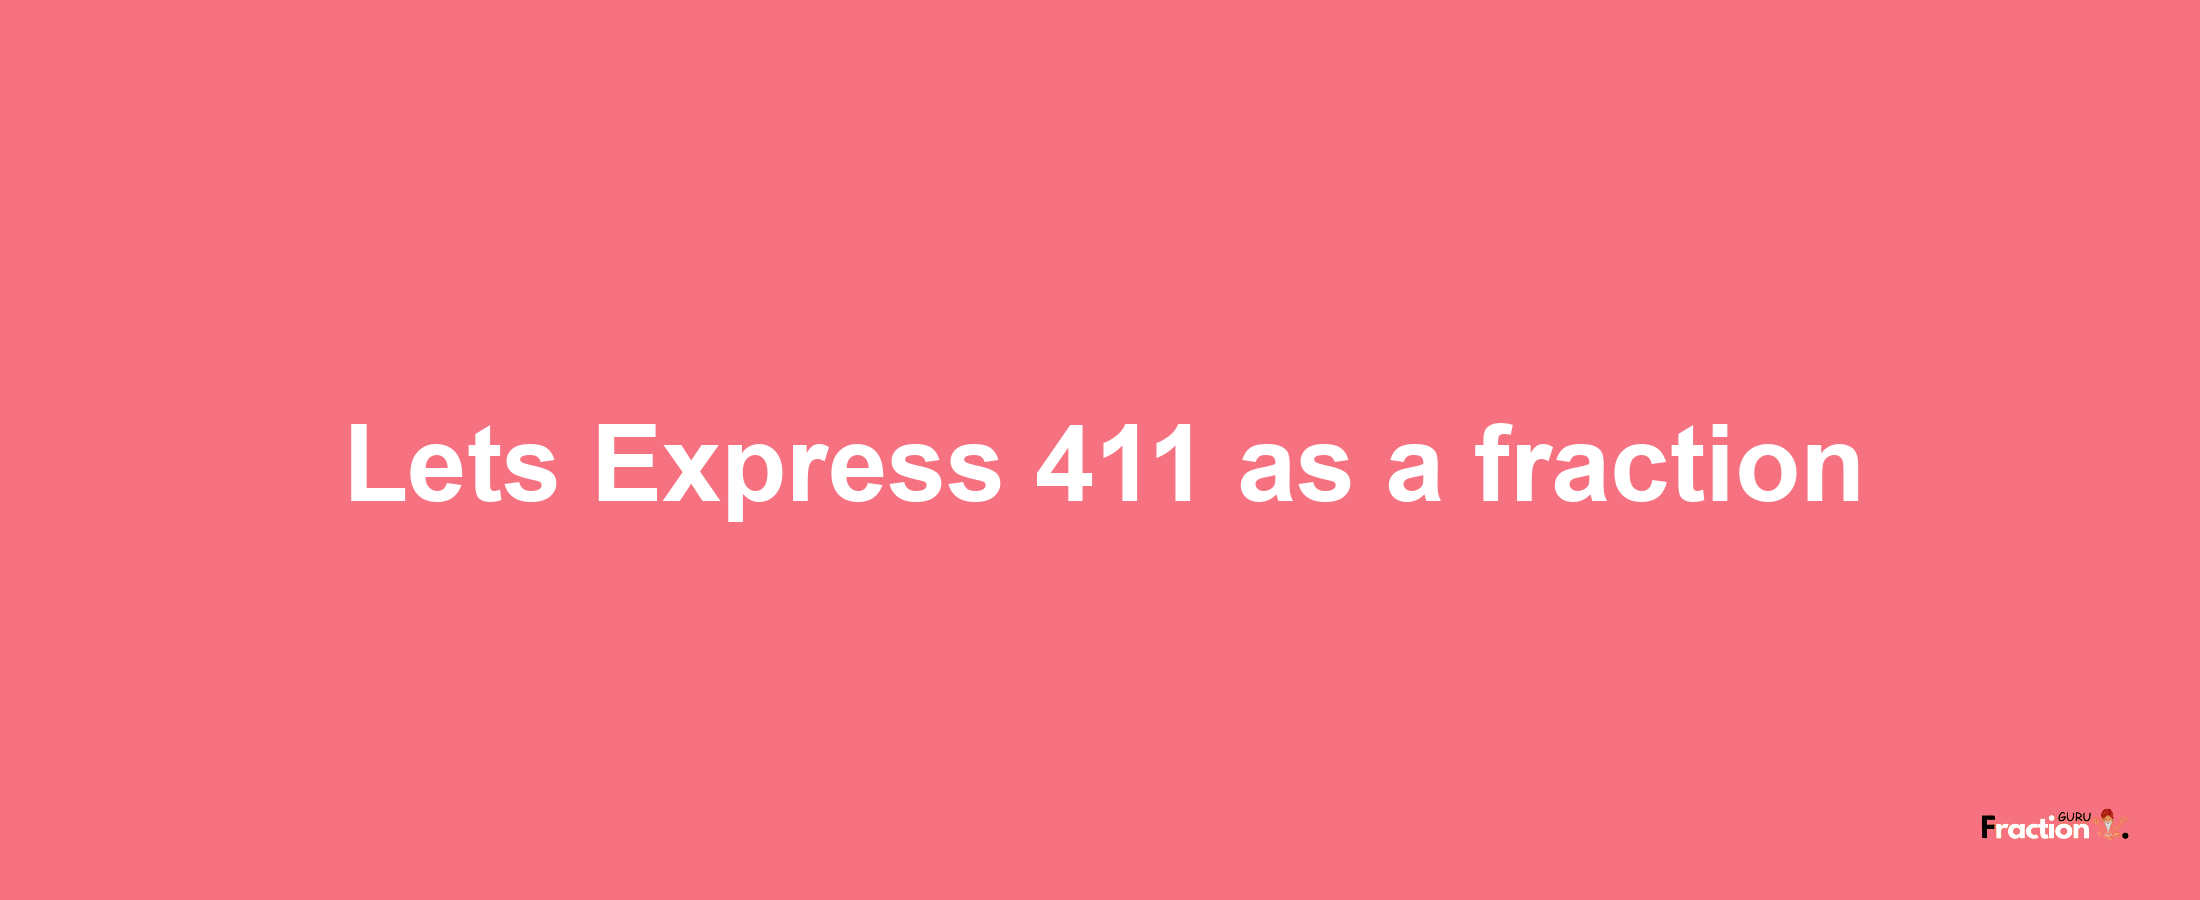 Lets Express 411 as afraction